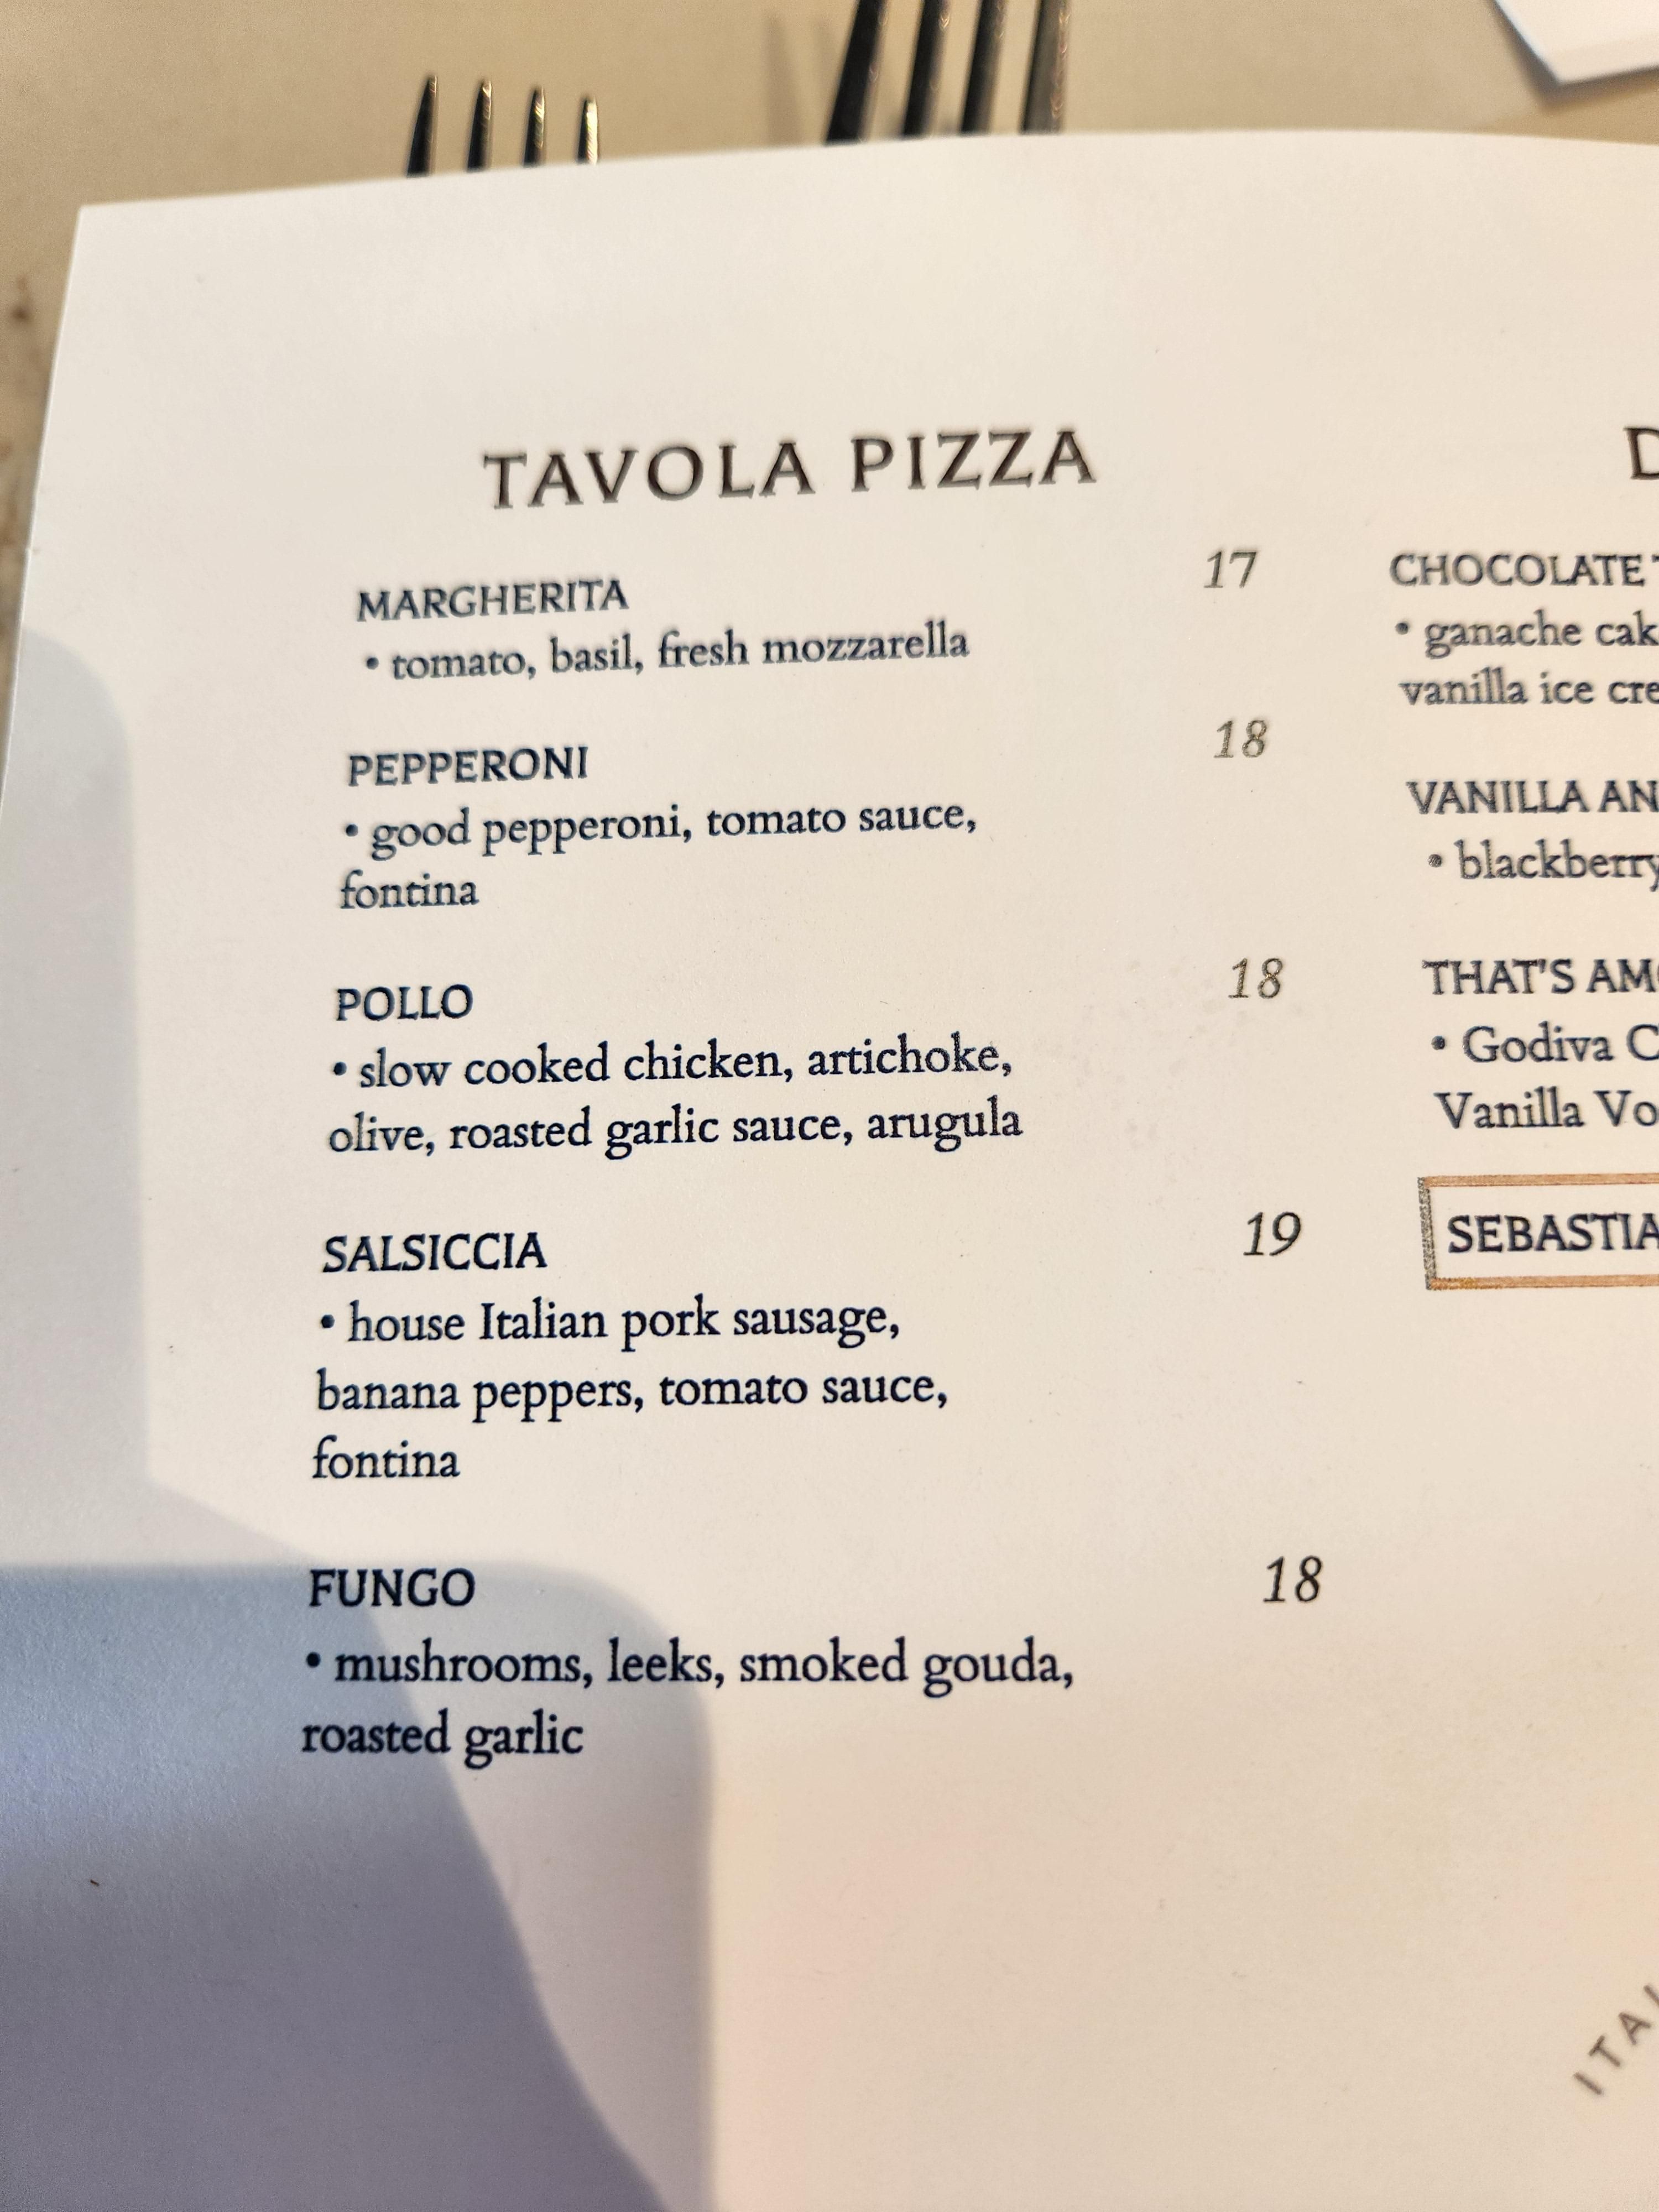 This fancy pizza restaurant in downtown Minneapolis only serves "good pepperoni" not that prepackaged crap lol